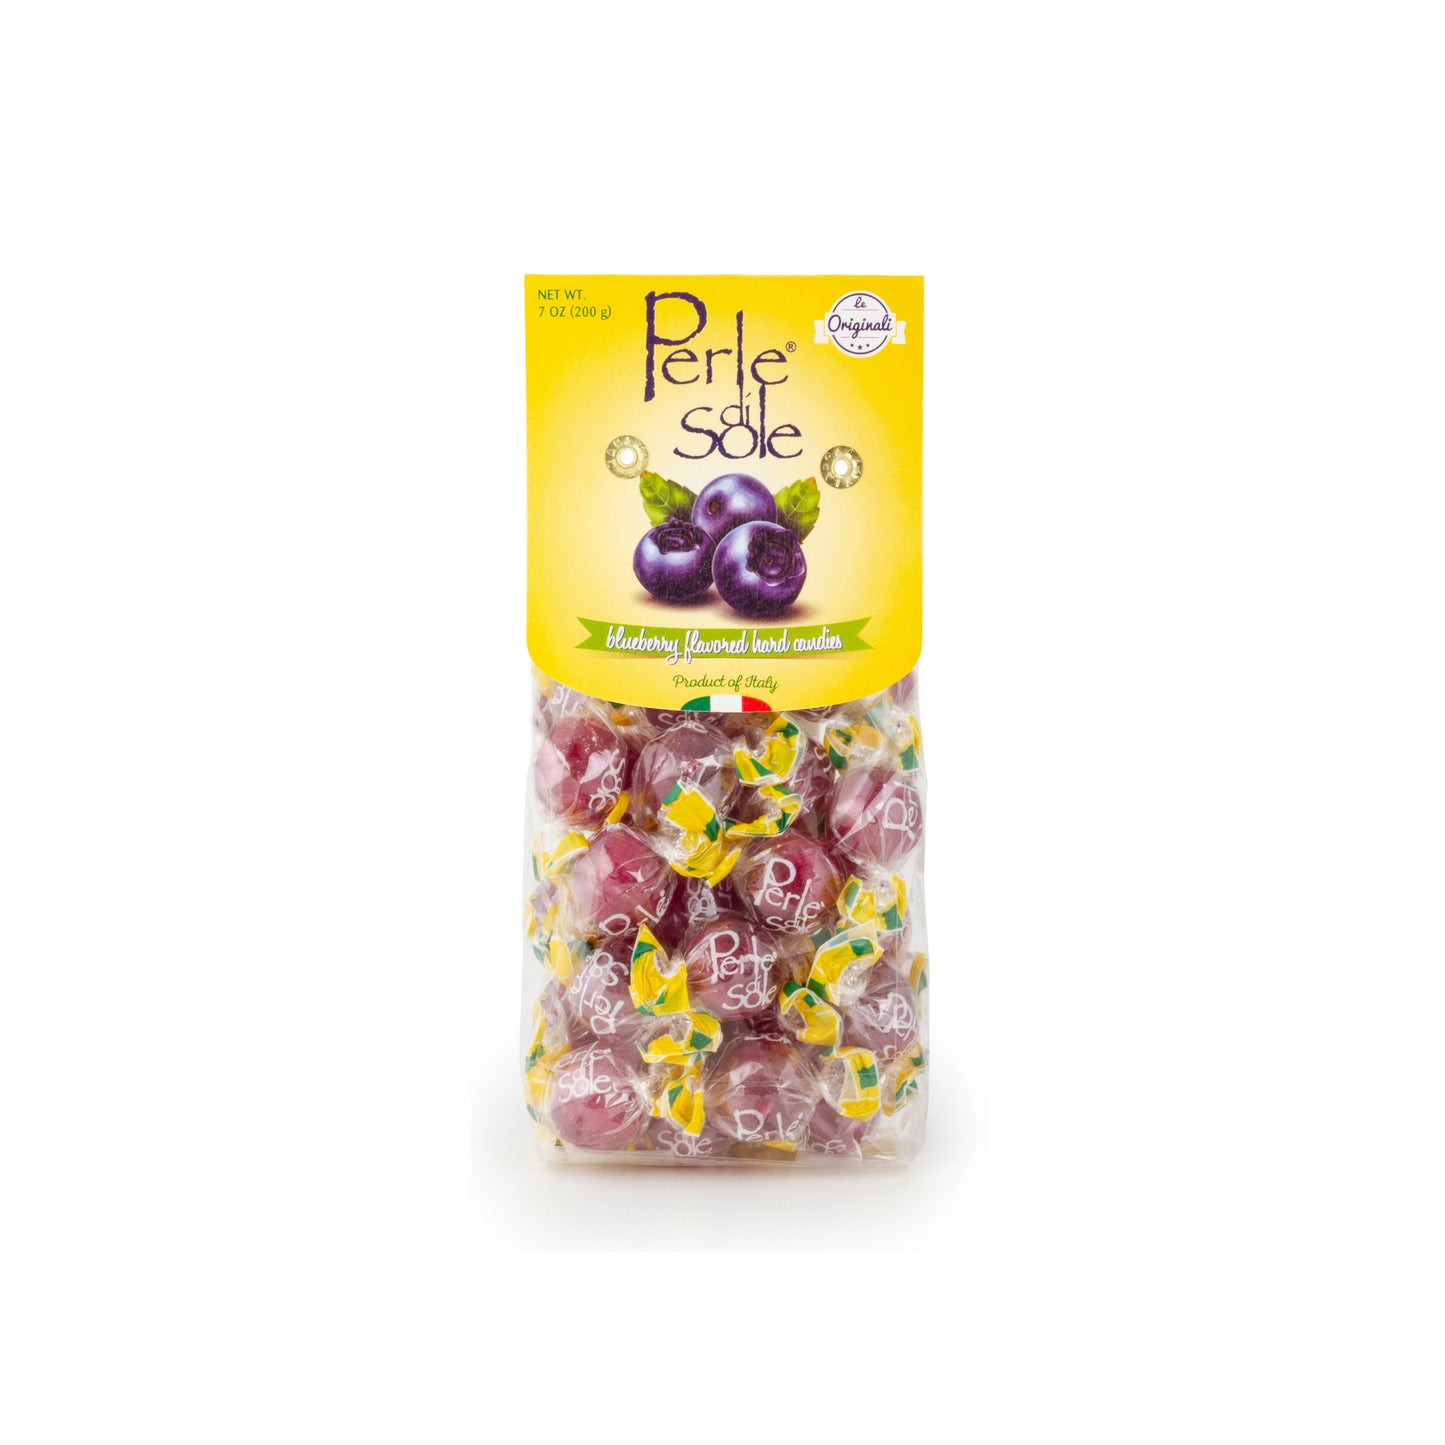 Blueberry Drops with a Tart Fizzy Filling